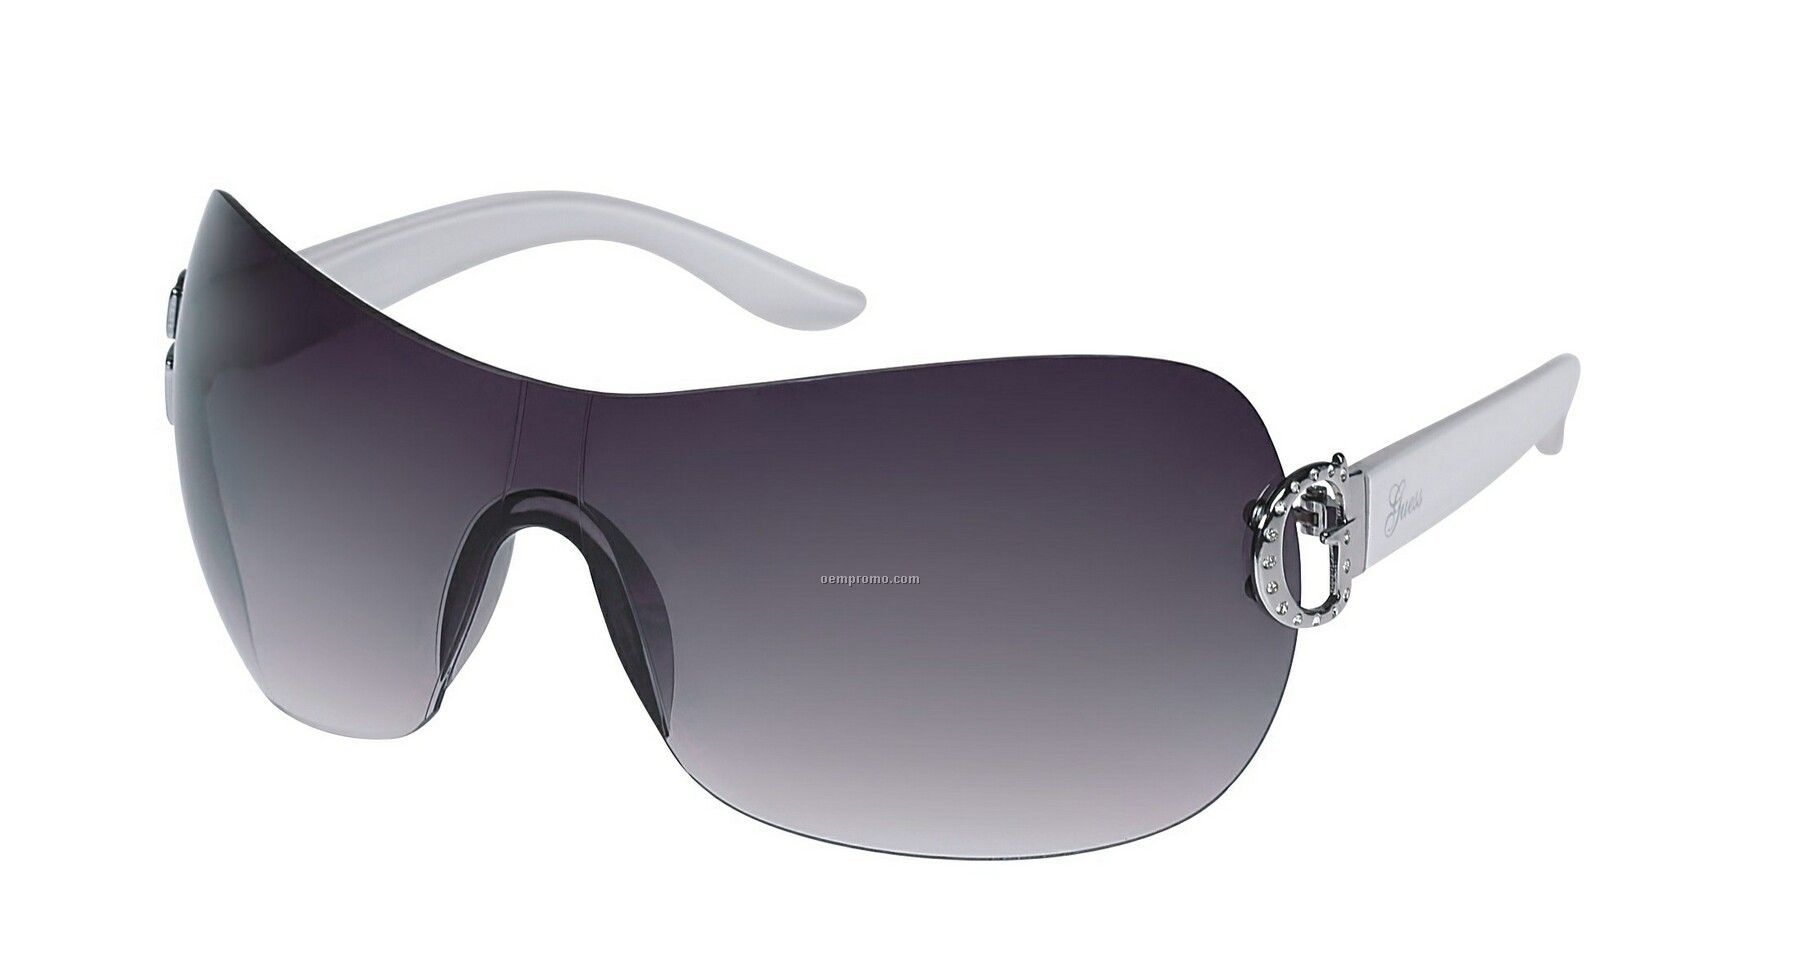 White Guess Ladies Sunglasses W/ Silver Accent